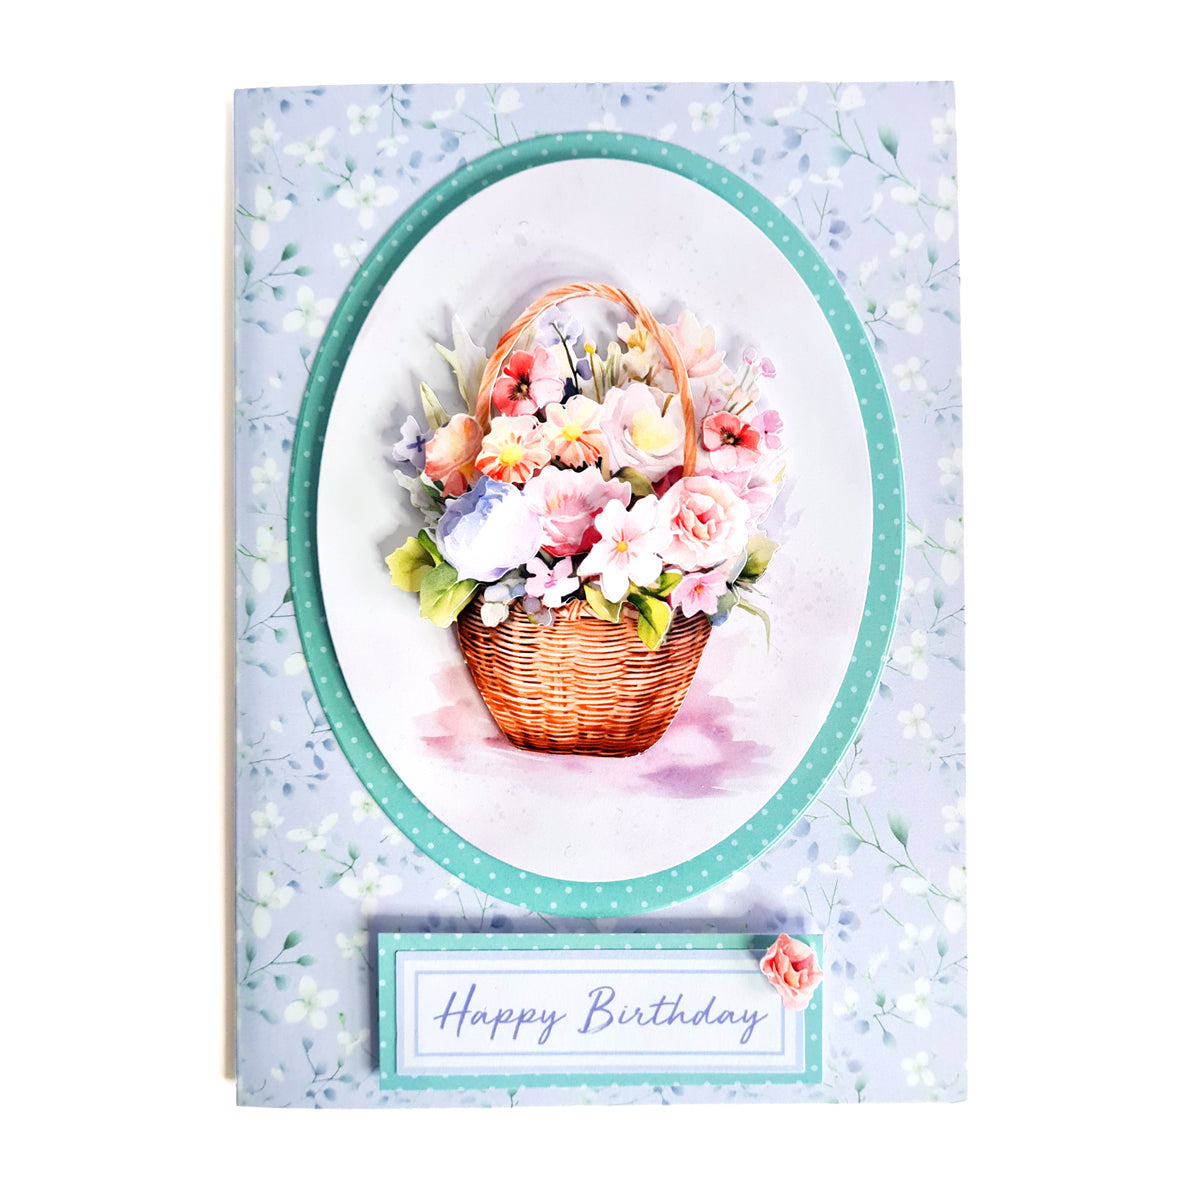 Spring Showcase Globes & Scenes Luxury Card Making Collection